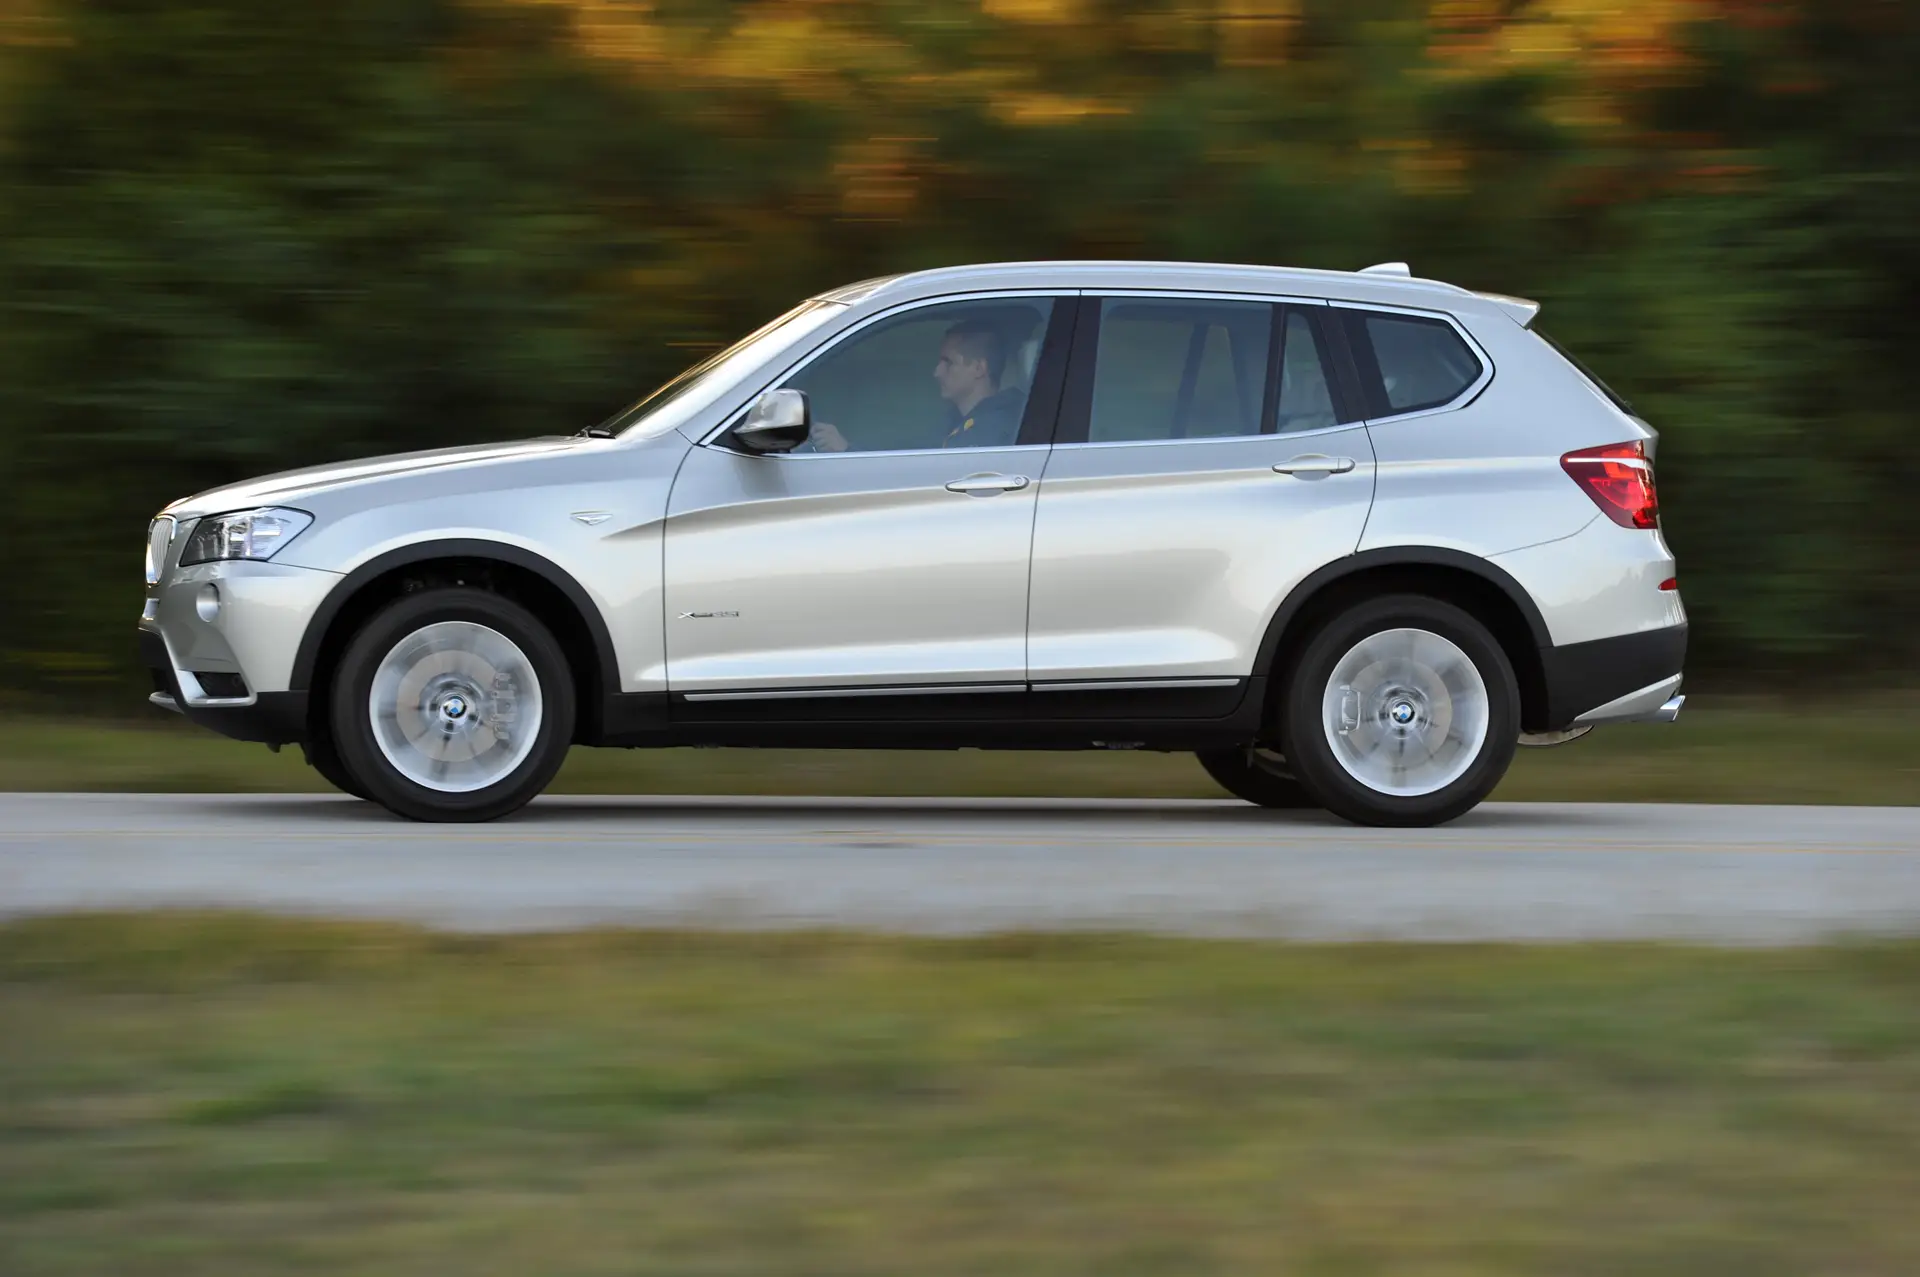 BMW X3 (2010-2018) Review: Exterior side photo of the BMW X3 on the road